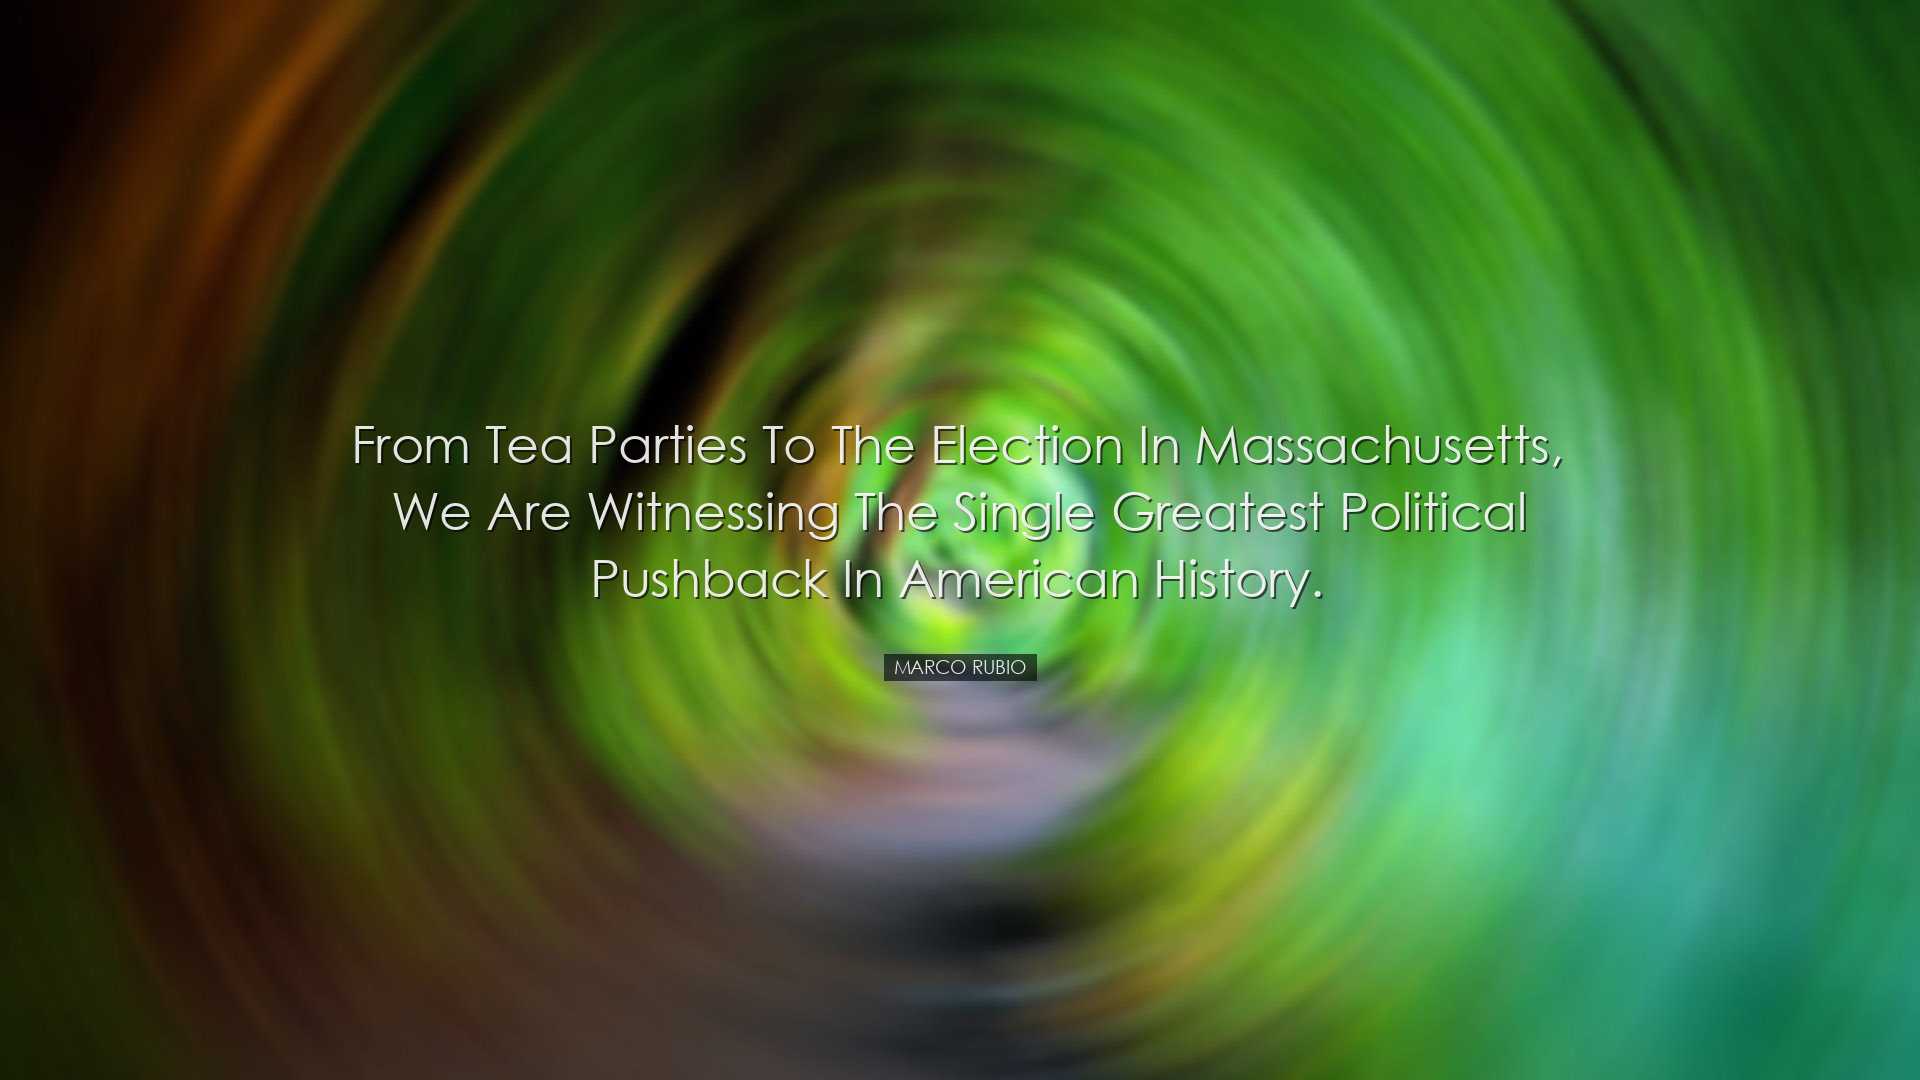 From tea parties to the election in Massachusetts, we are witnessi